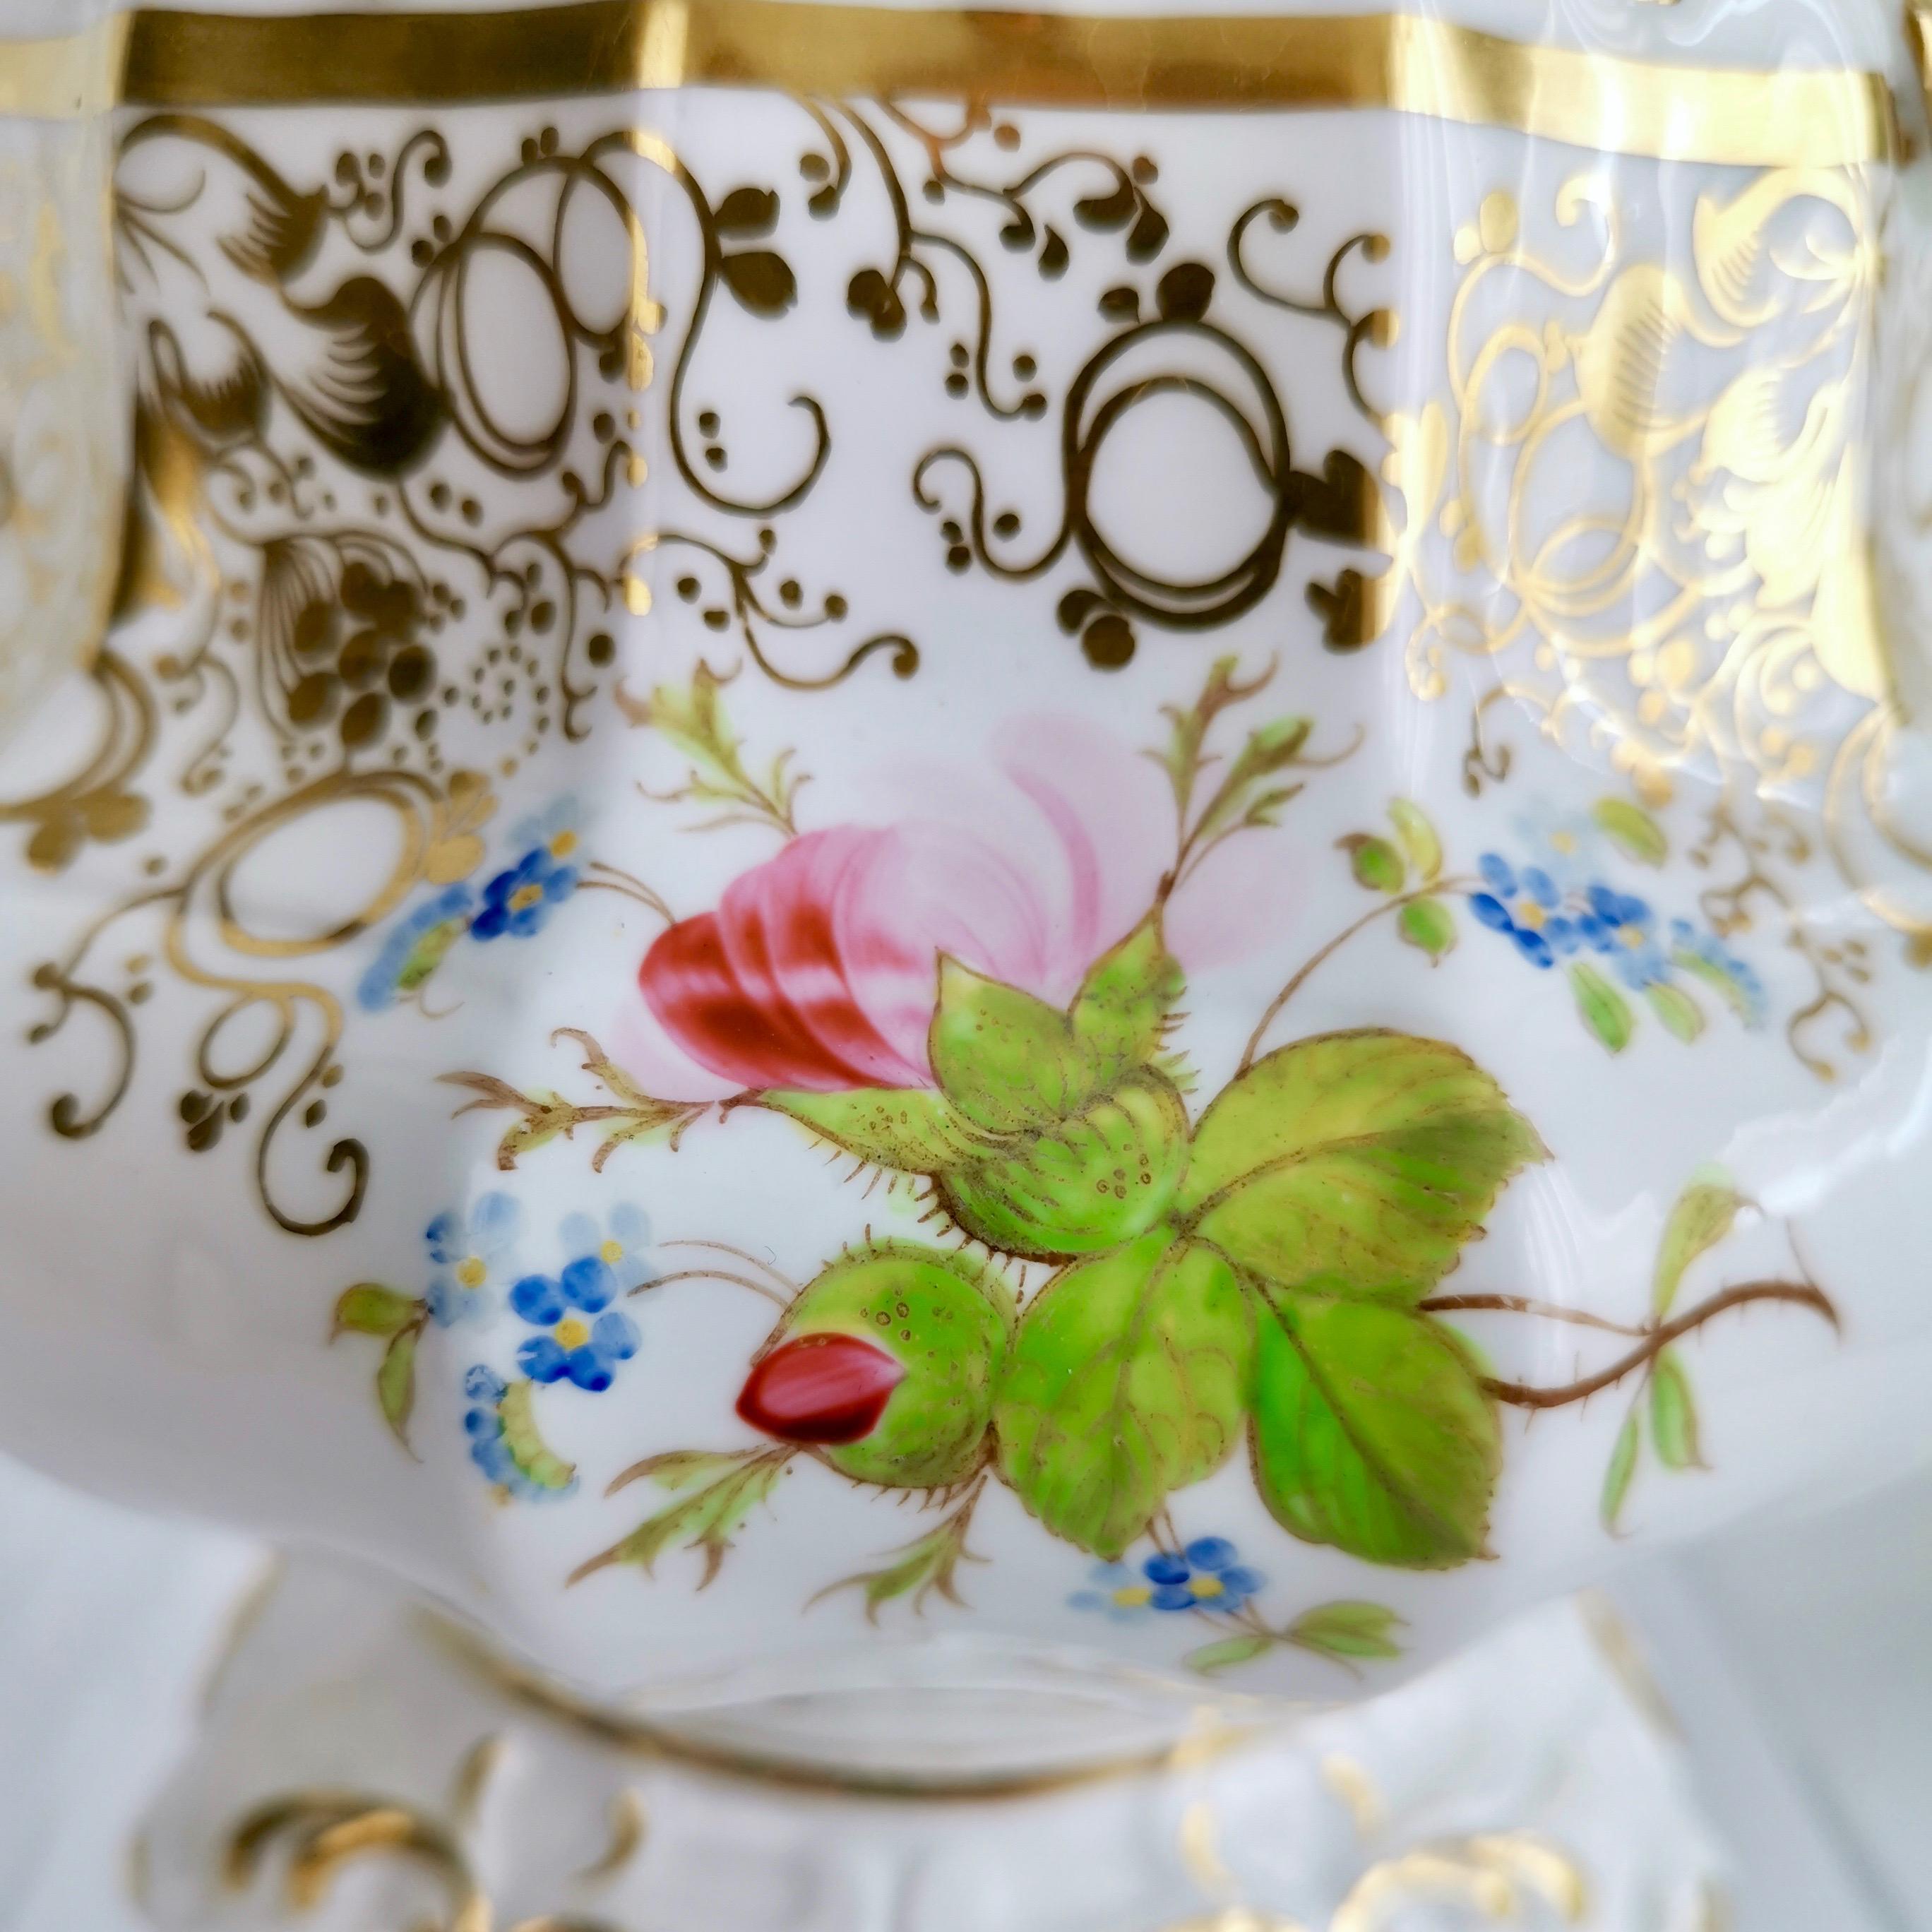 Hand-Painted Staffordshire Porcelain Tea Service, White and Gilt, Rococo Revival, circa 1845